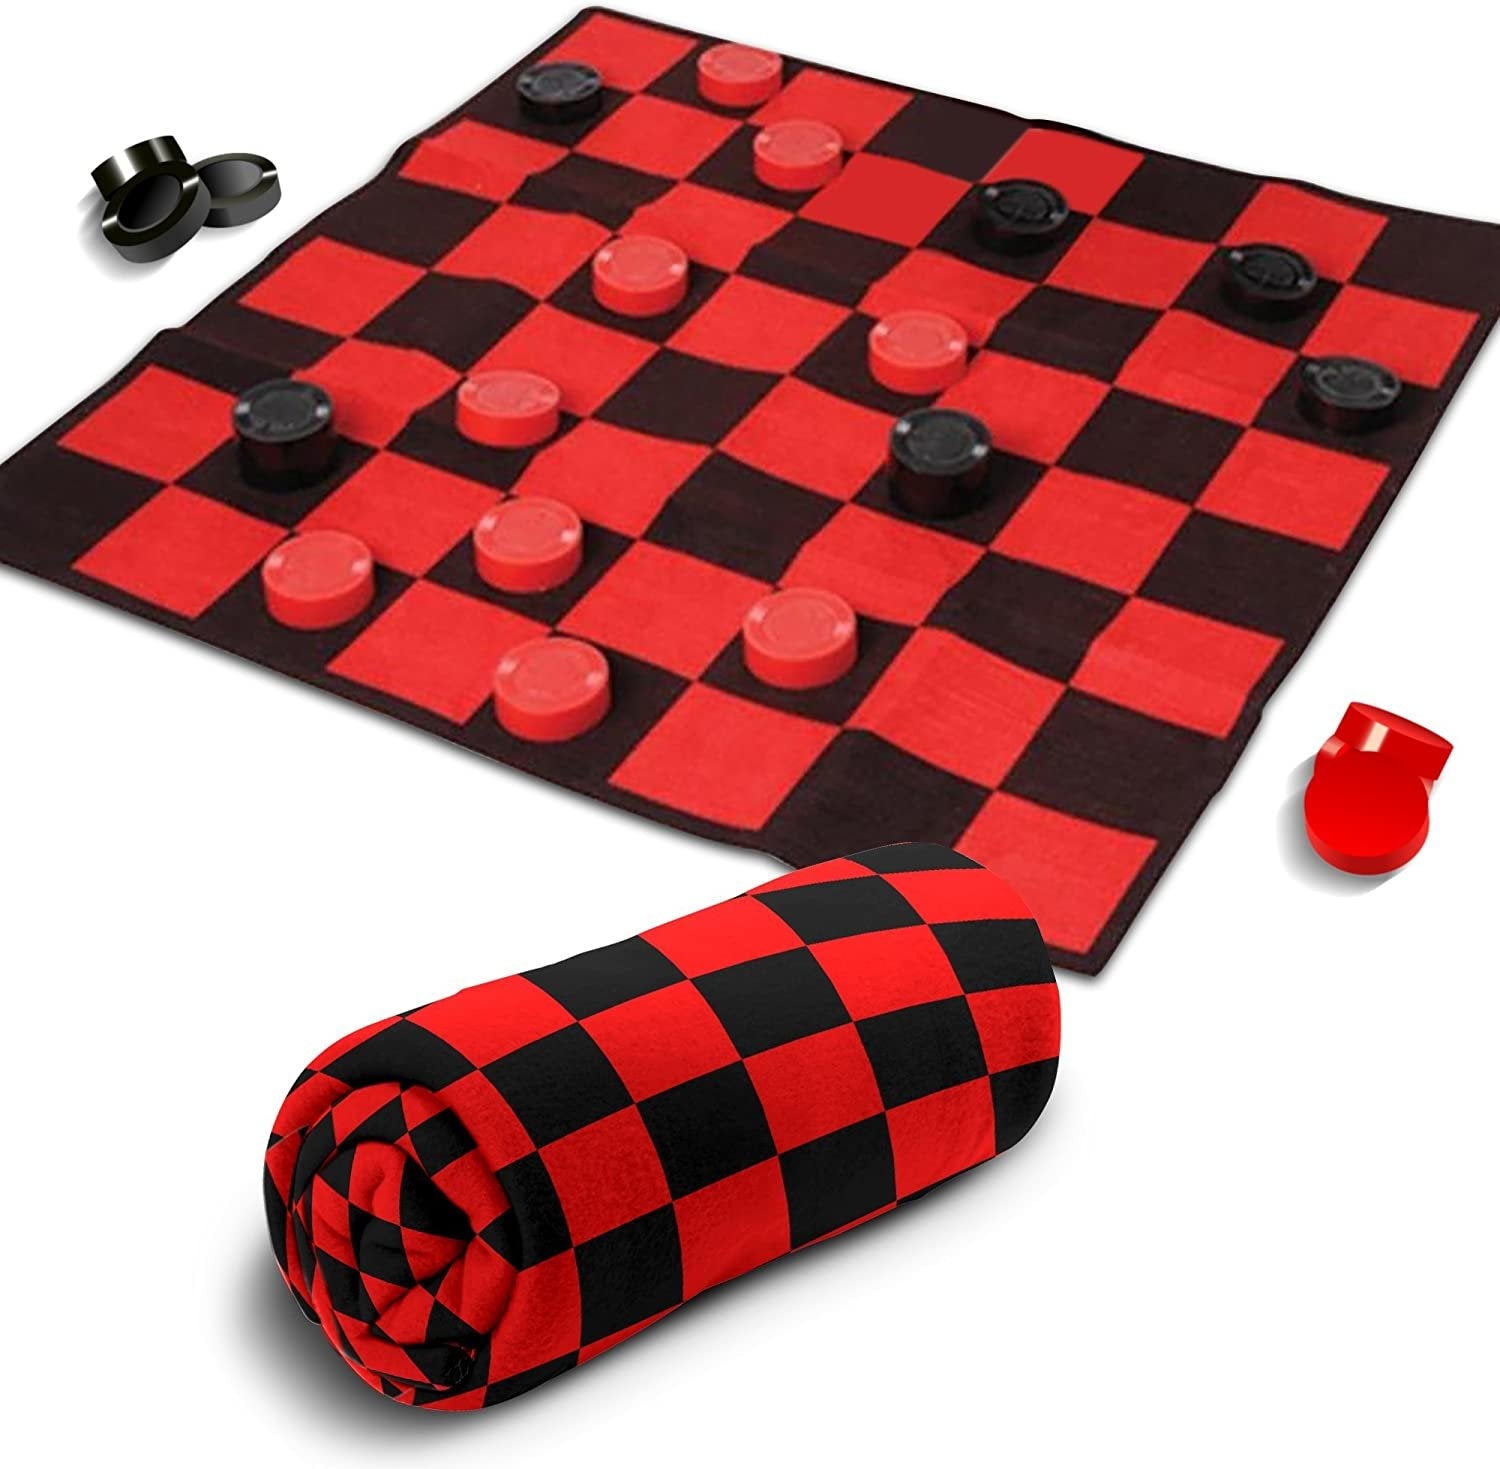 Giant Checkers Rug Set by Gamie - 34.5 x 34.5" Jumbo Checker Board Floor Mat Game with Huge Pieces - Great Gift Idea for Boys and Girls, Fun Birthday Party Activity - Play Room Rug - Red and Black